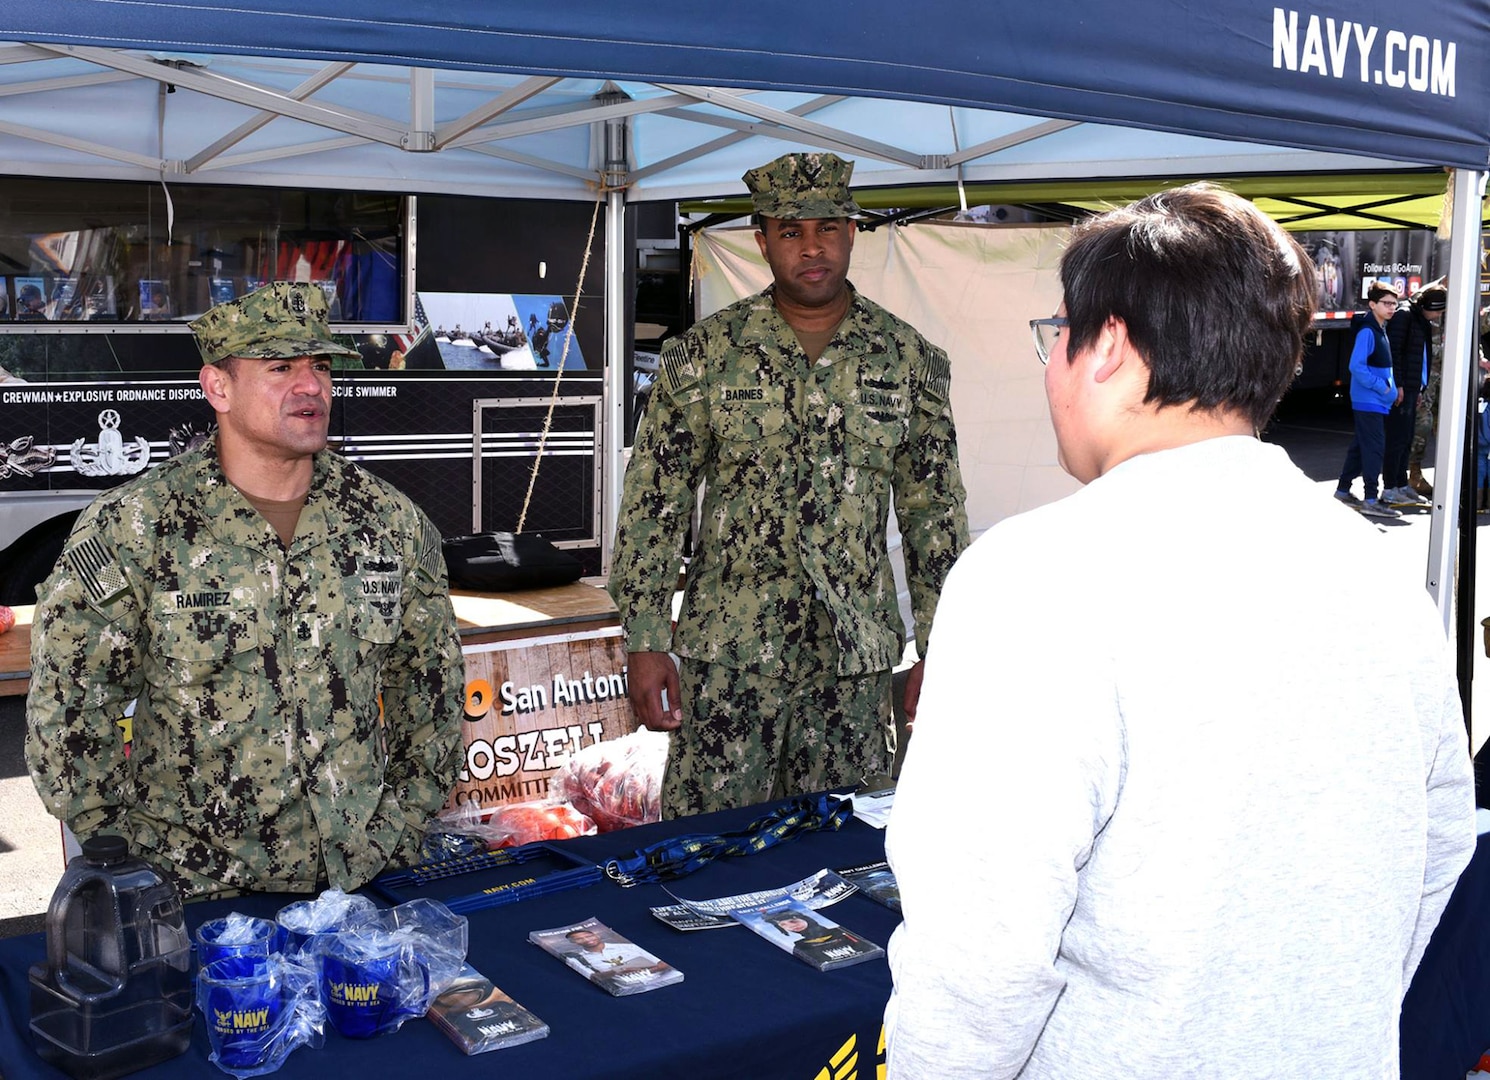 Chief Petty Officer Juan Ramirez (left) and Petty Officer 1st Class Vincent Barnes (right) of Navy Recruiting District San Antonio speak with an attendee at the San Antonio Stock Show and Rodeo.